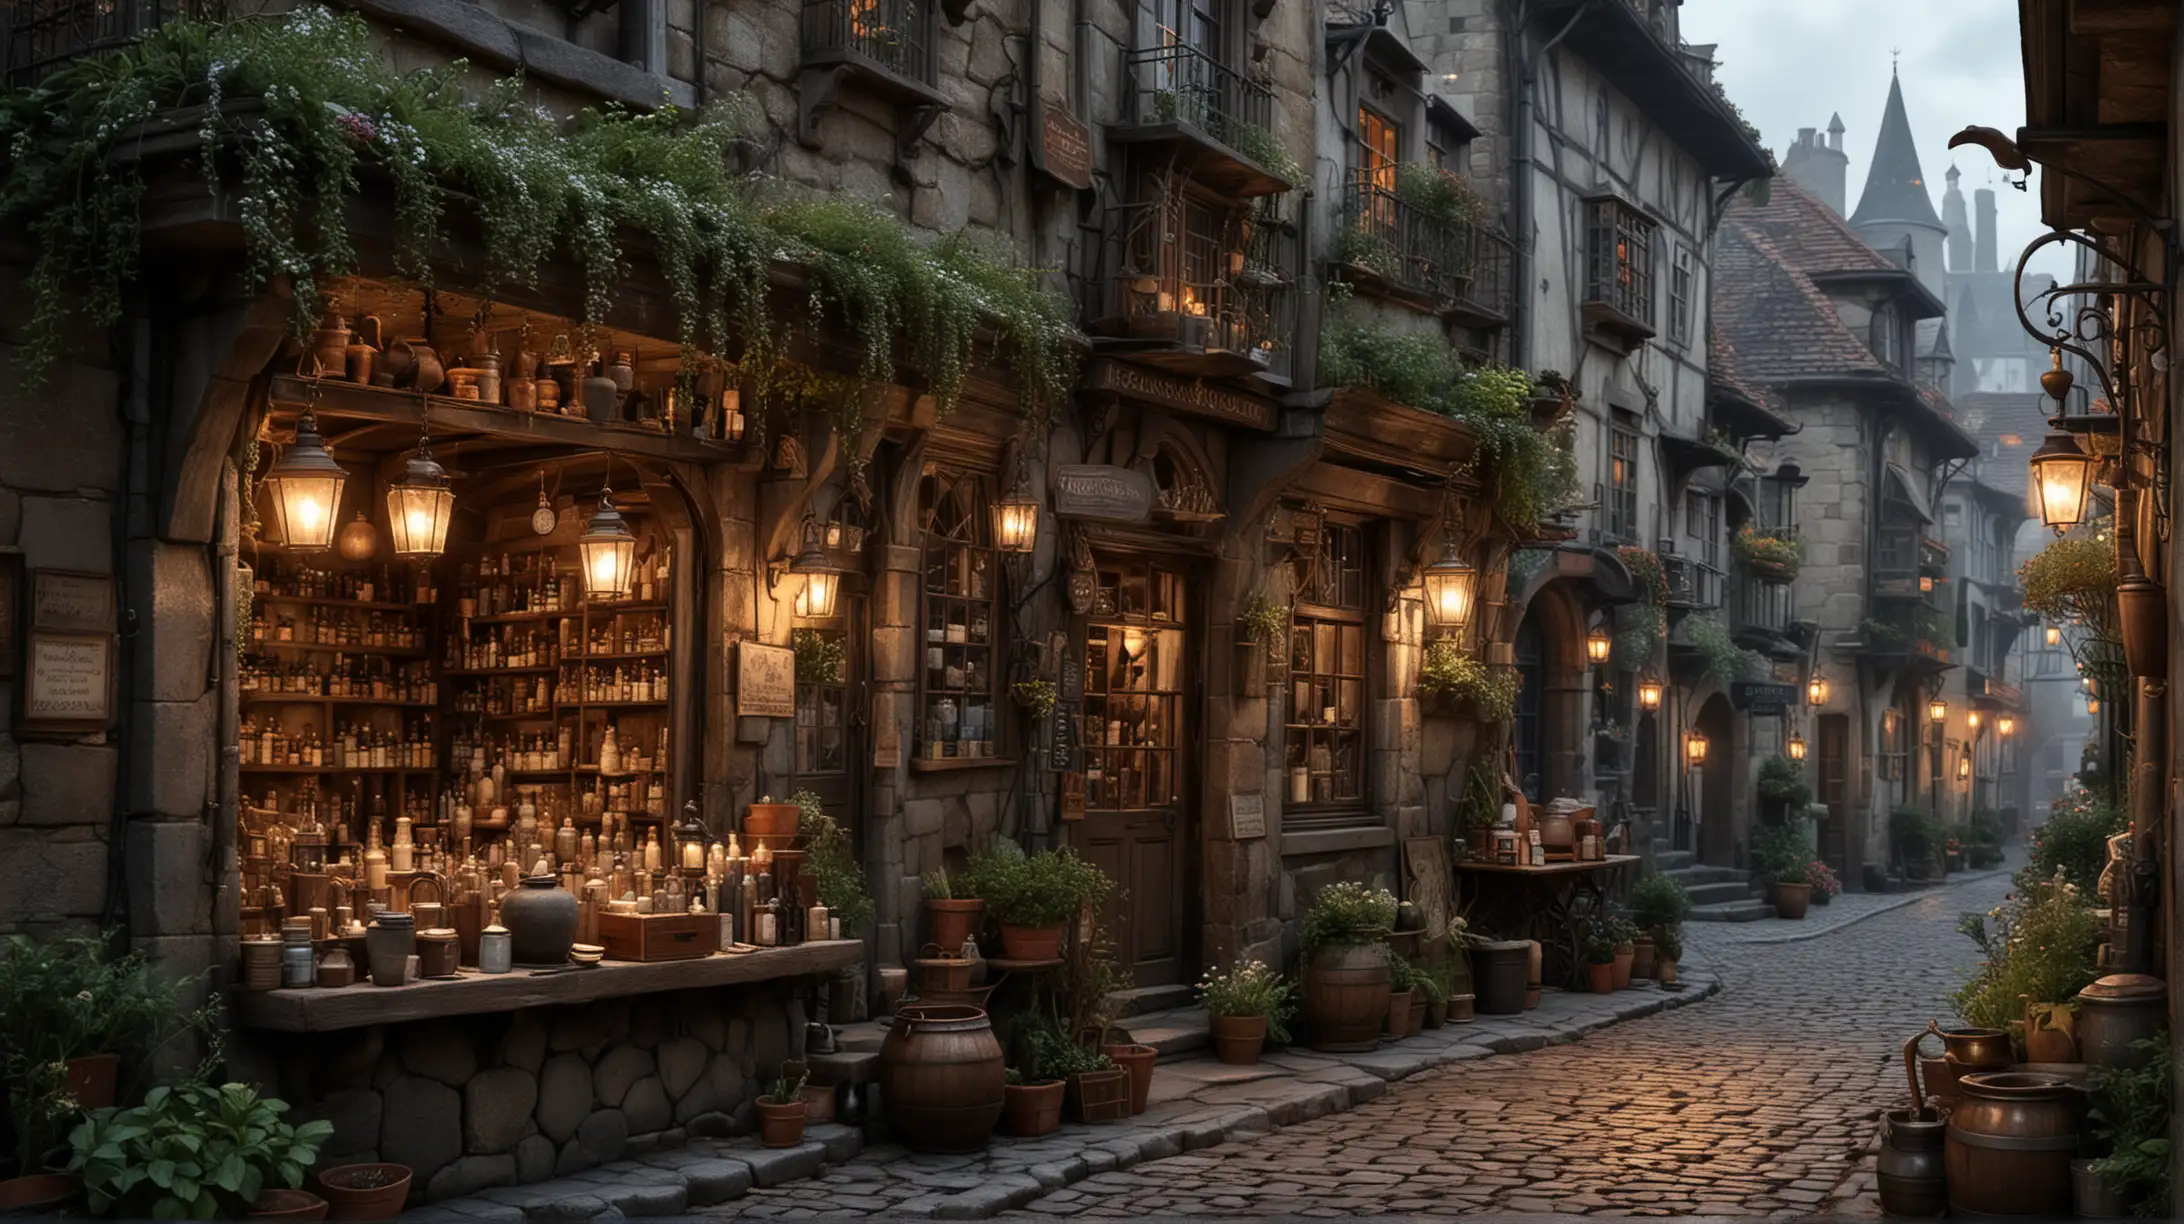 In the heart of a bustling city, where the cobblestone streets echoed with the whispers of magic, there stood a modest apothecary shop known as "The Cauldron's Brew." It was here that a young orphan named Lysandra found herself seeking refuge after a chance encounter changed the course of her destiny.